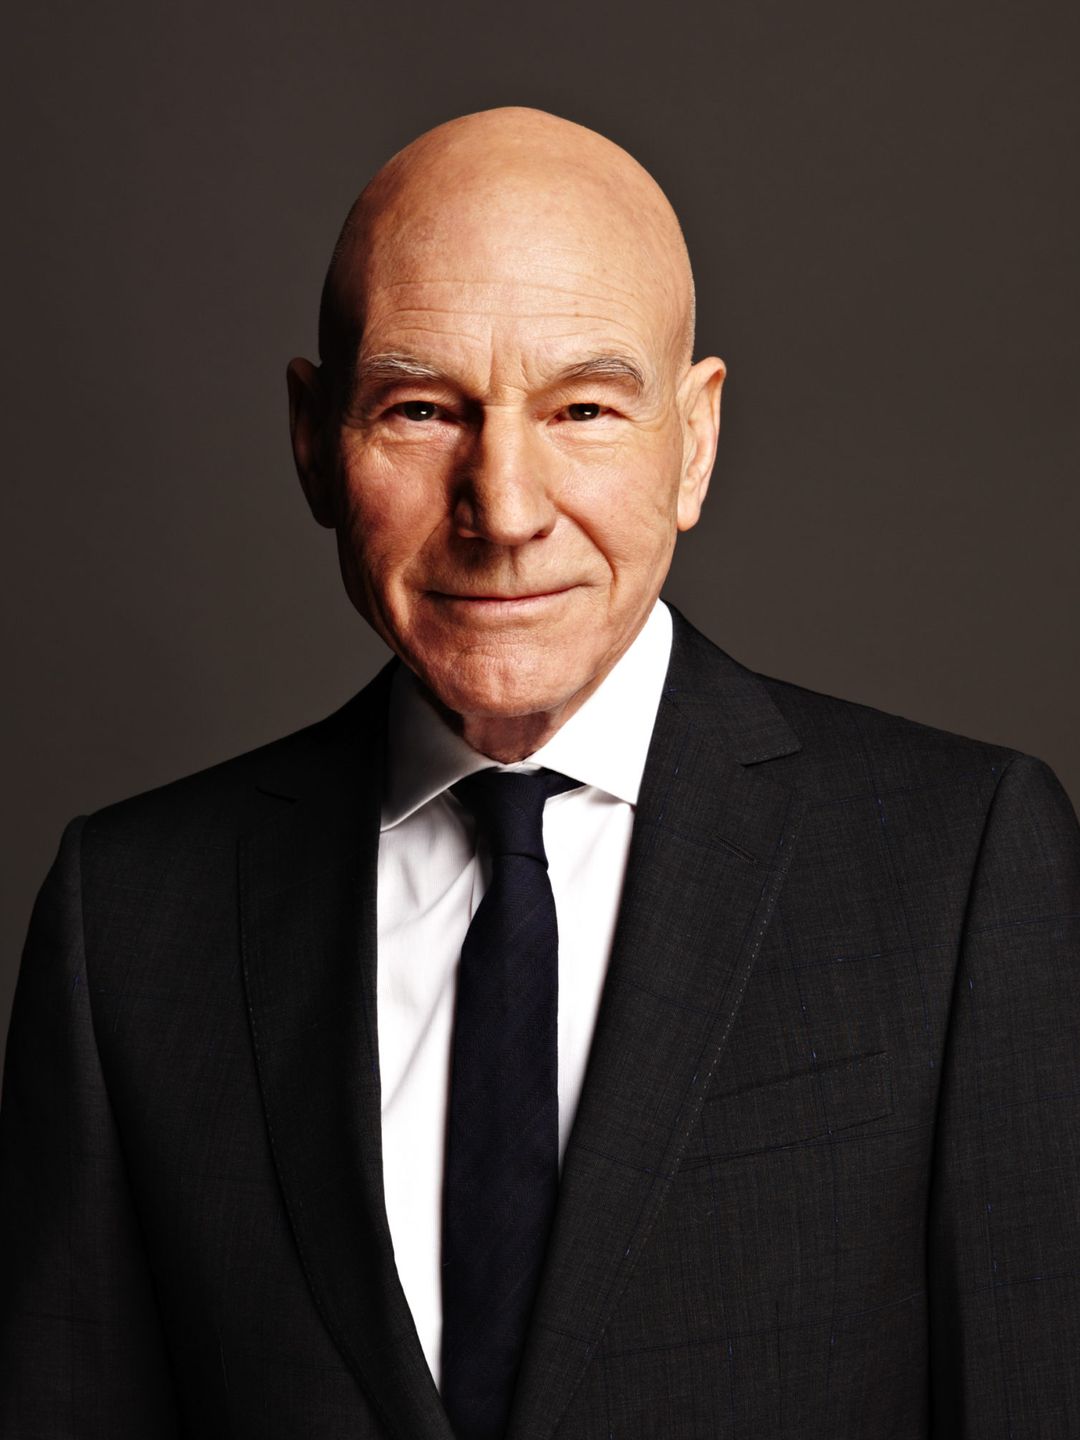 Patrick Stewart in real life